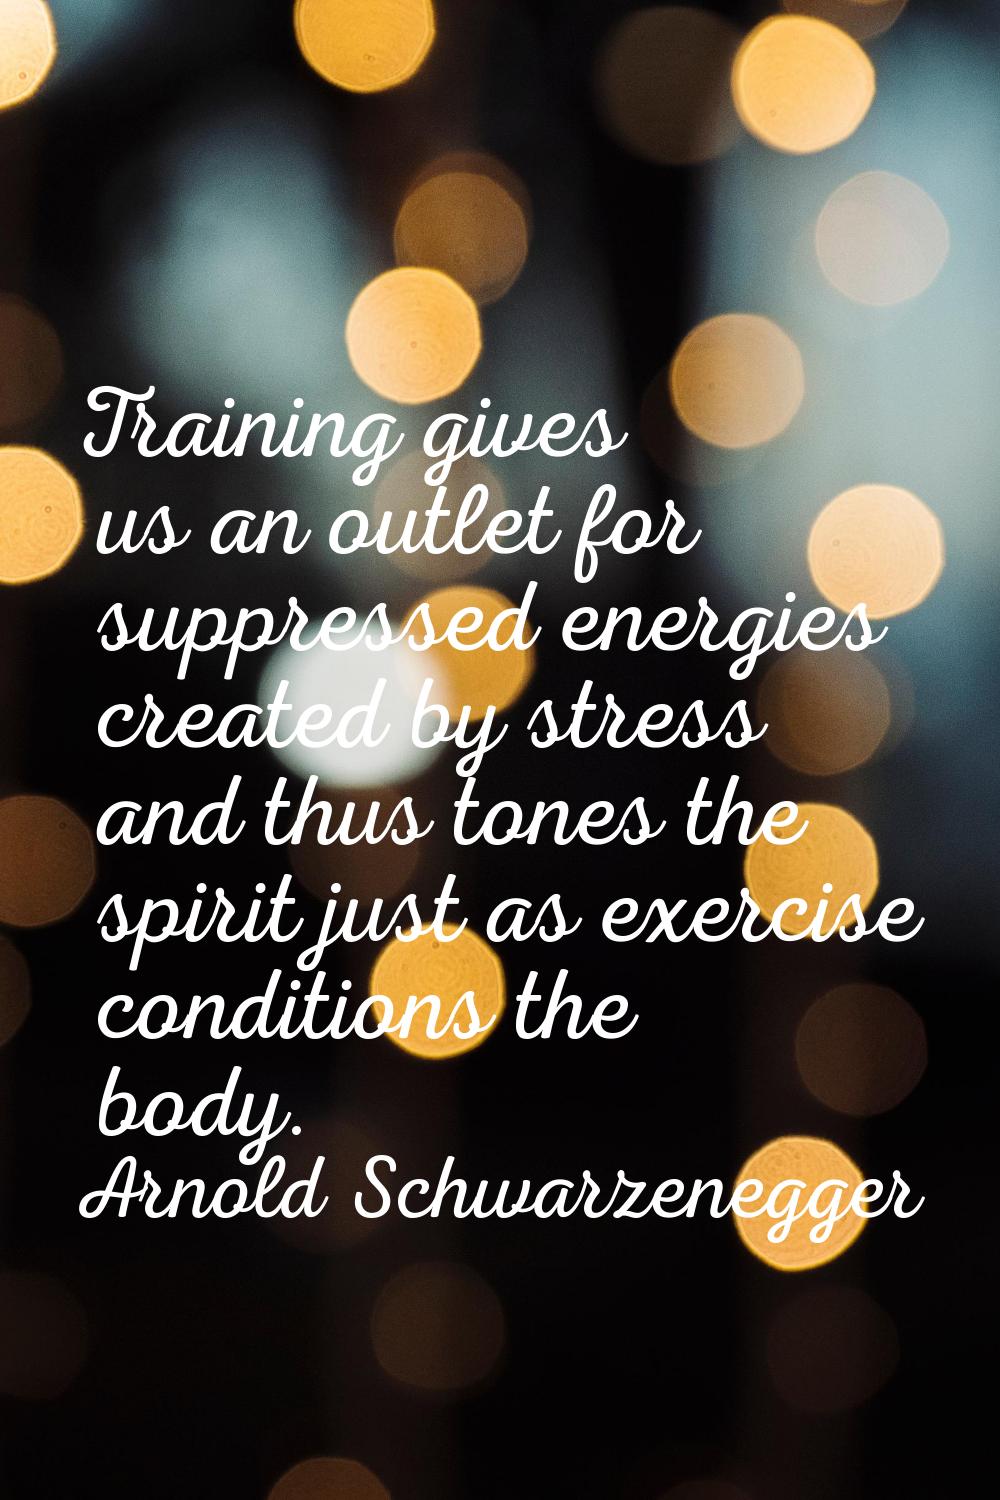 Training gives us an outlet for suppressed energies created by stress and thus tones the spirit jus